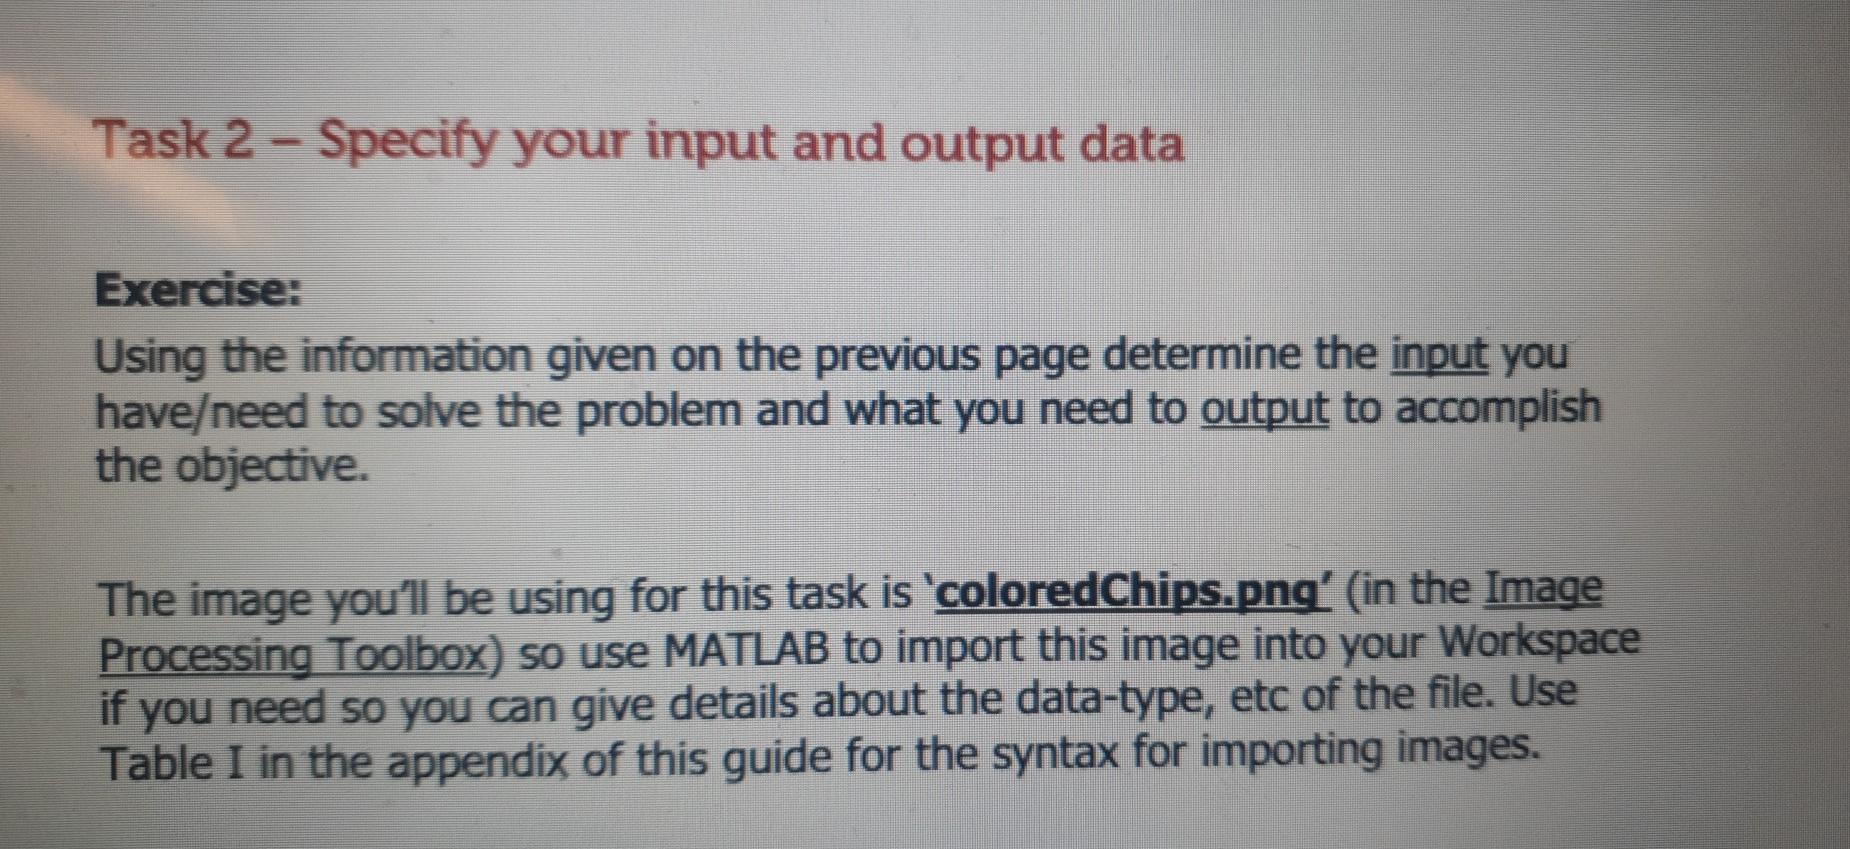 Task 2 - Specify your input and output data
Exercise:
Using the information given on the previous page determine the input yo